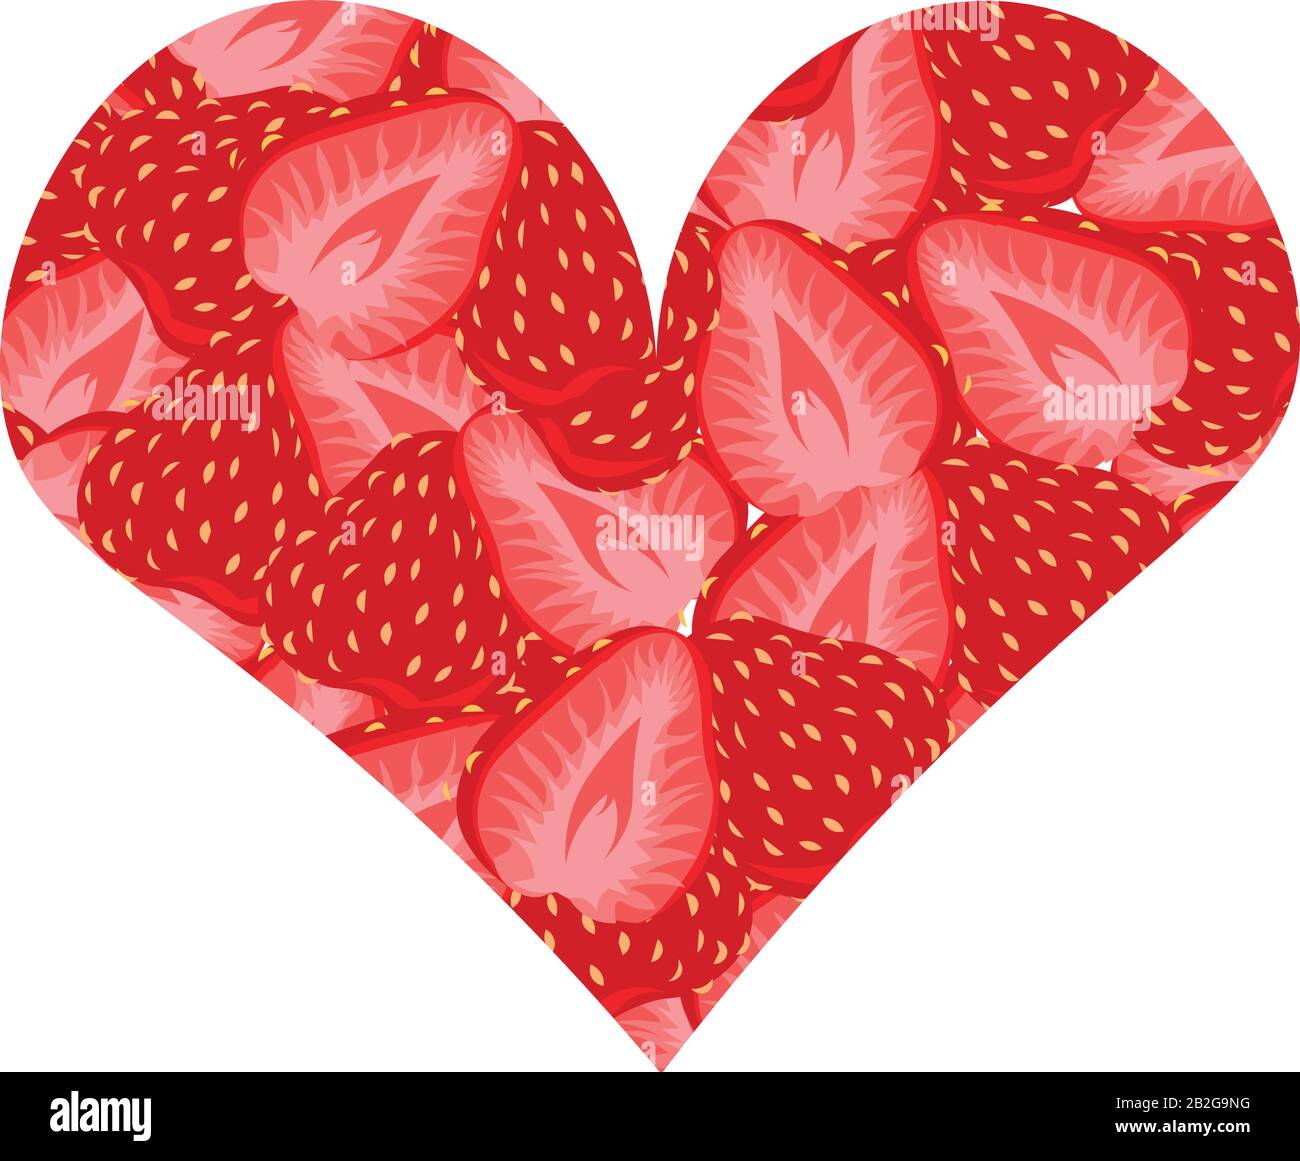 Strawberry center. Sweet design for cards, flyers, scenery. Valentine's Day. Love and romance. Stock Vector